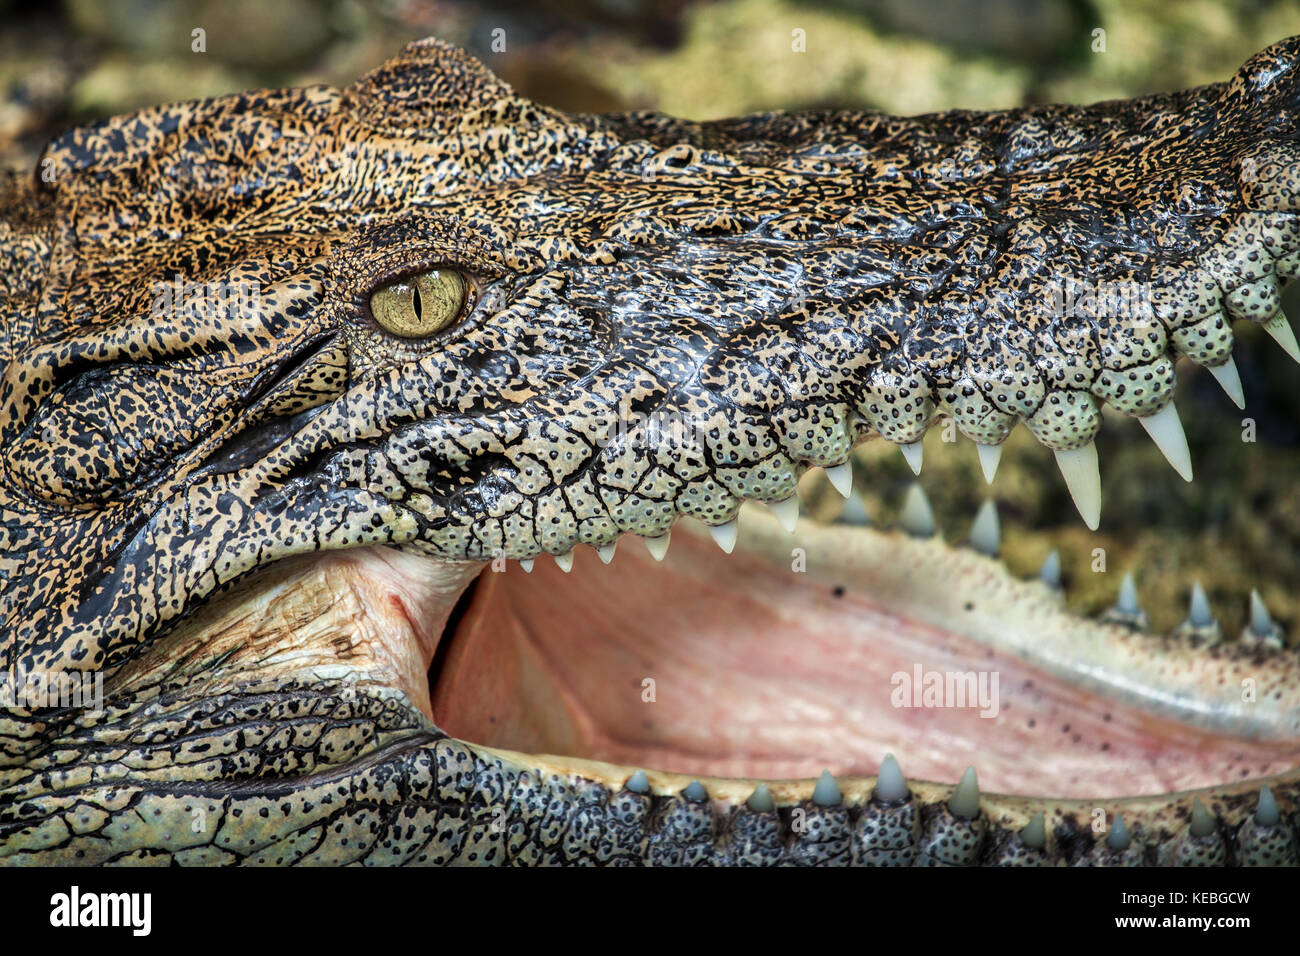 Extreme close-up view of a Saltwater Crocodile (Crocodylus porosus) head revealing the texture of the skin with protruding teeth. Borneo wildlife Stock Photo